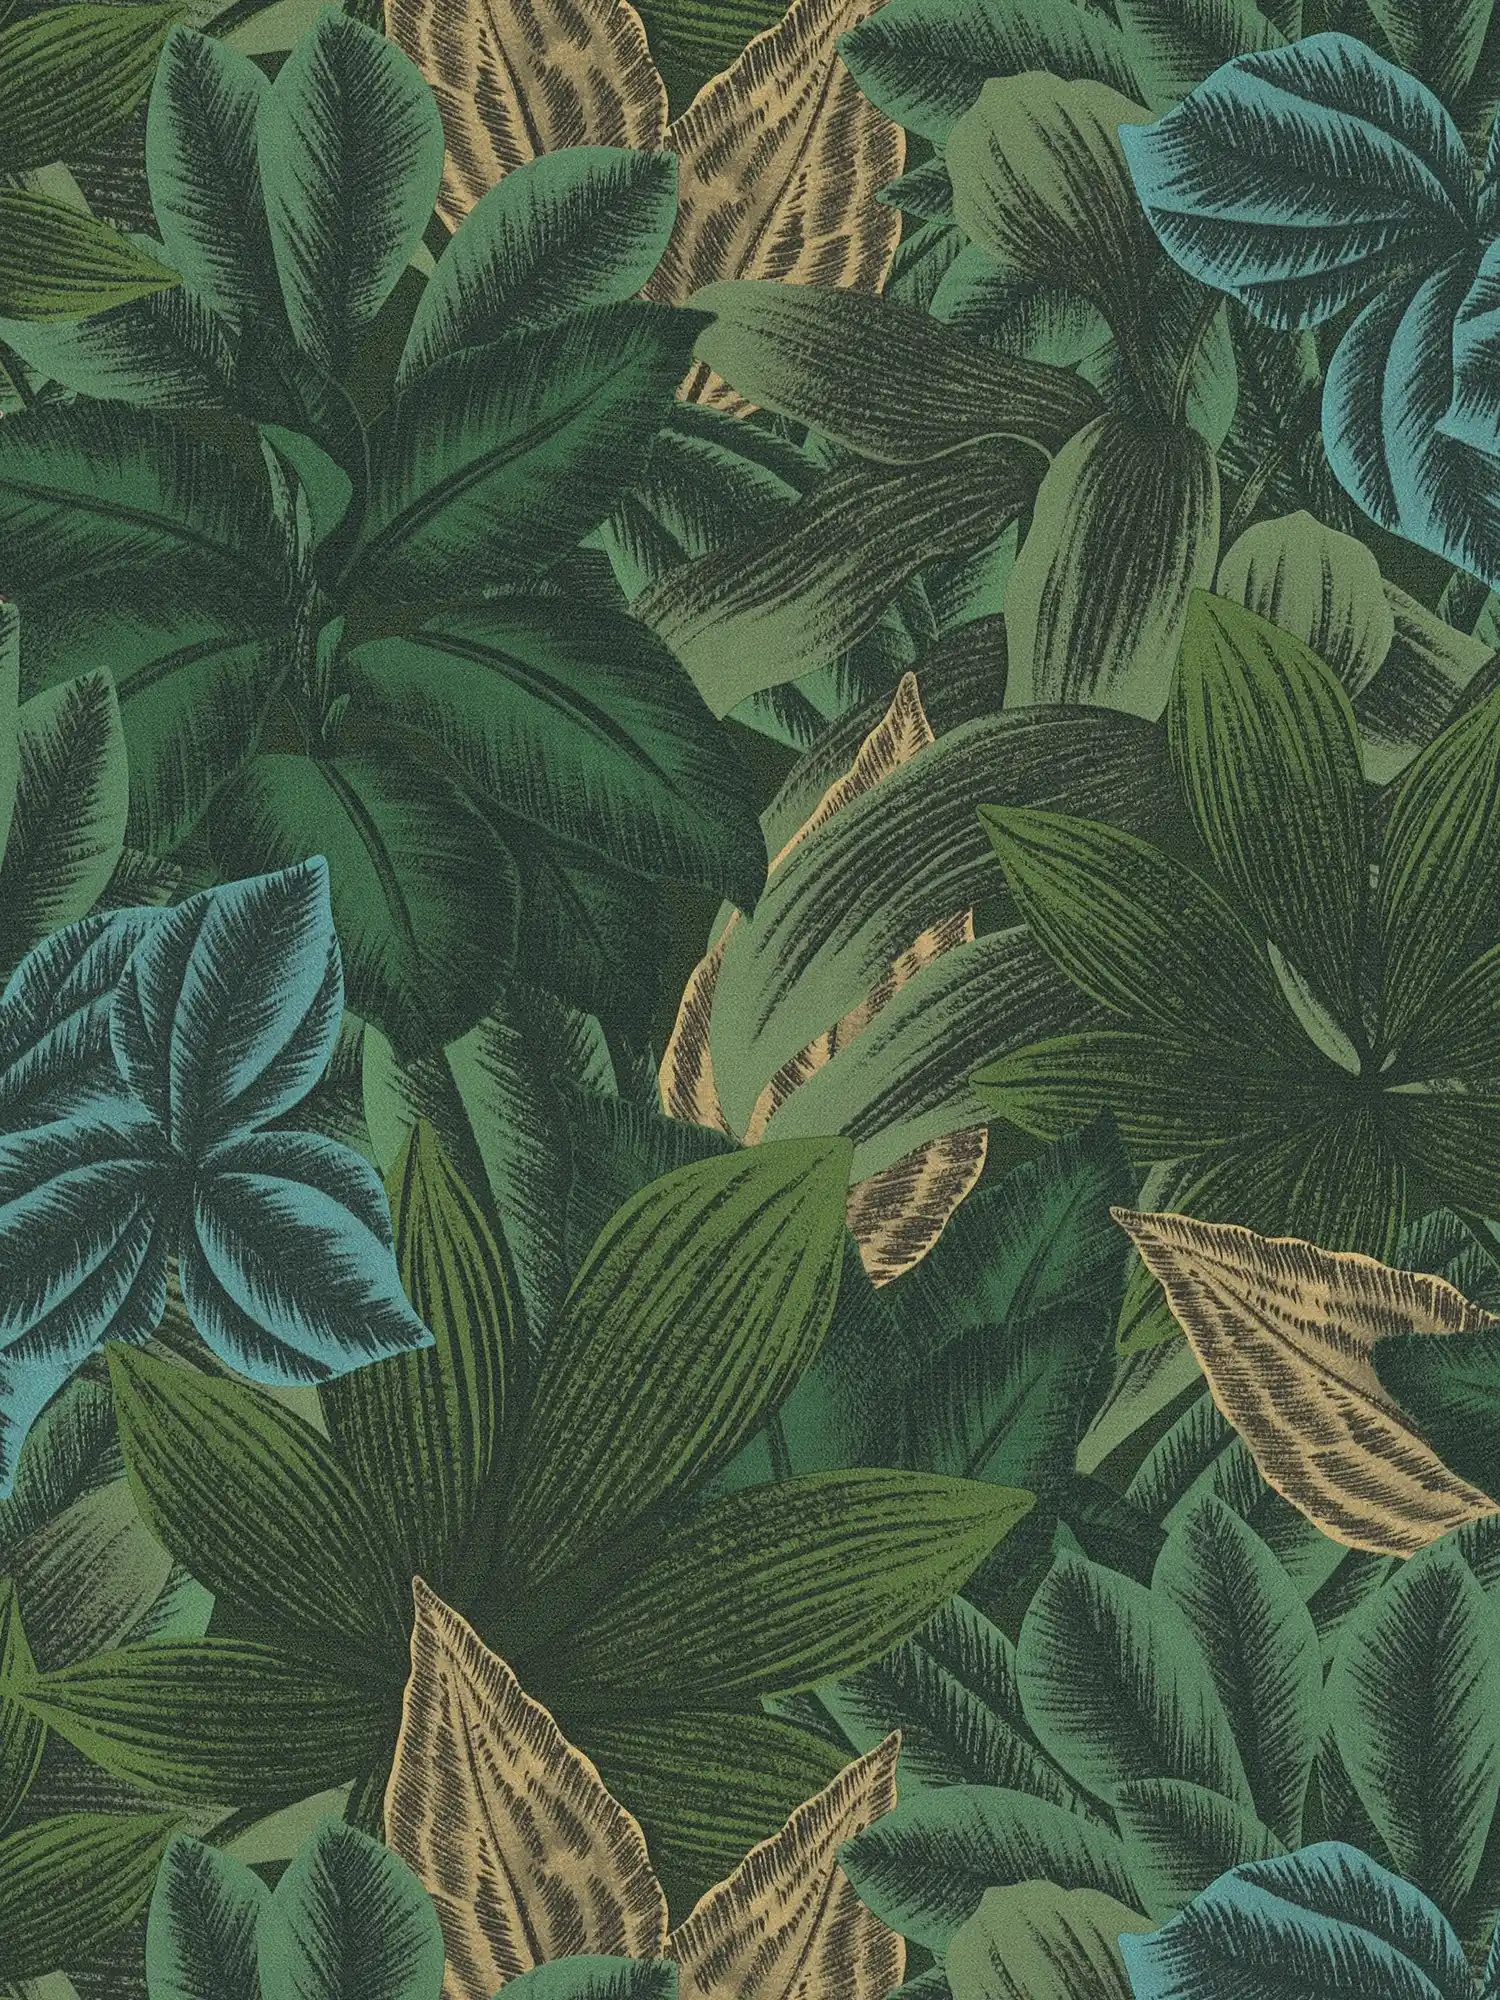 Jungle wallpaper with tropical leaf pattern - green, yellow
